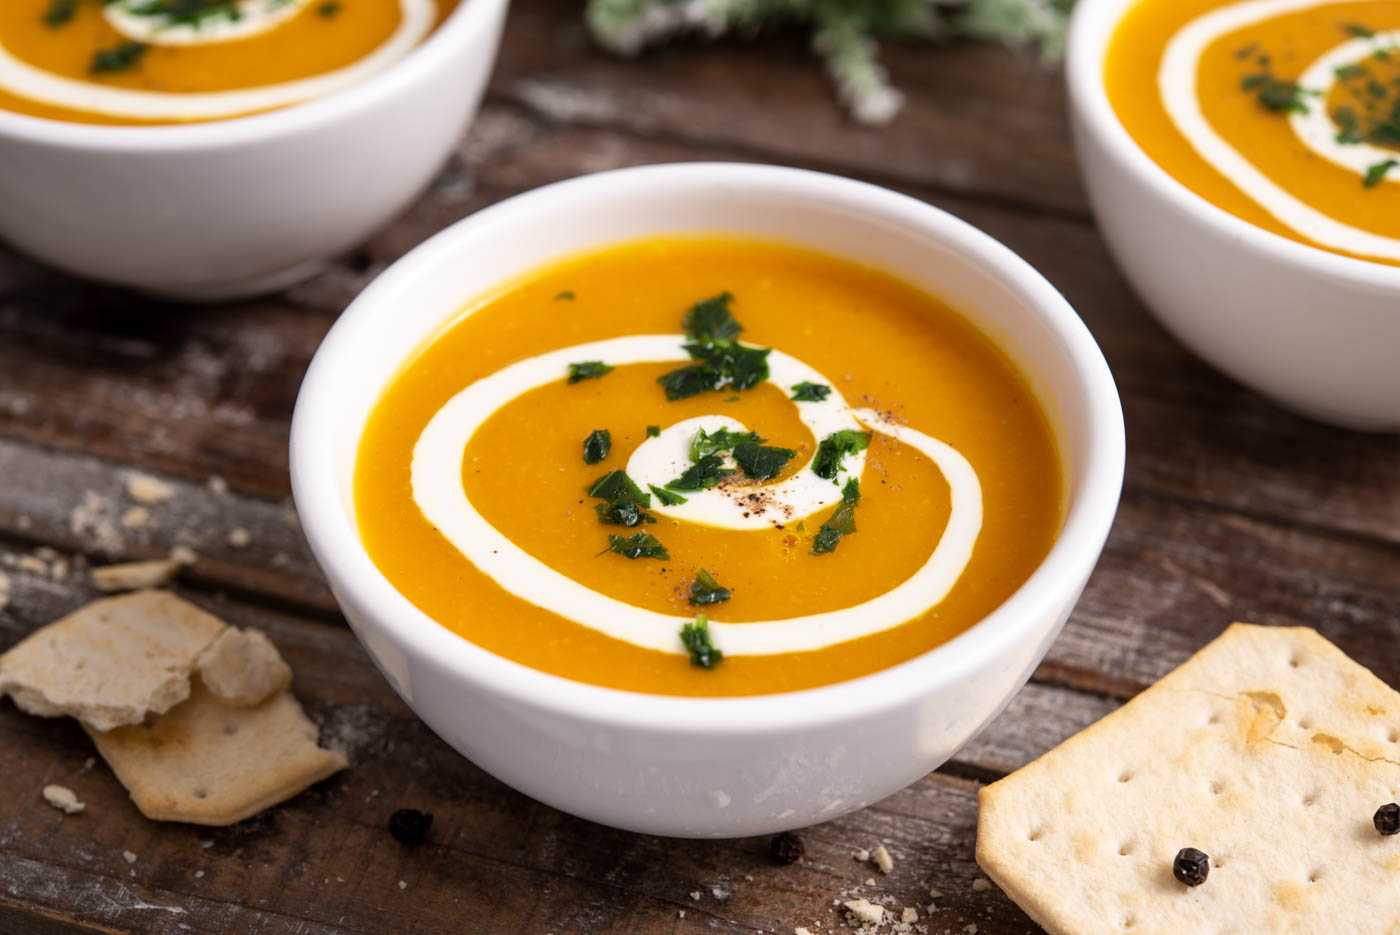 Blended Butternut squash soup in white ball topped with sour cram and chopped parsley